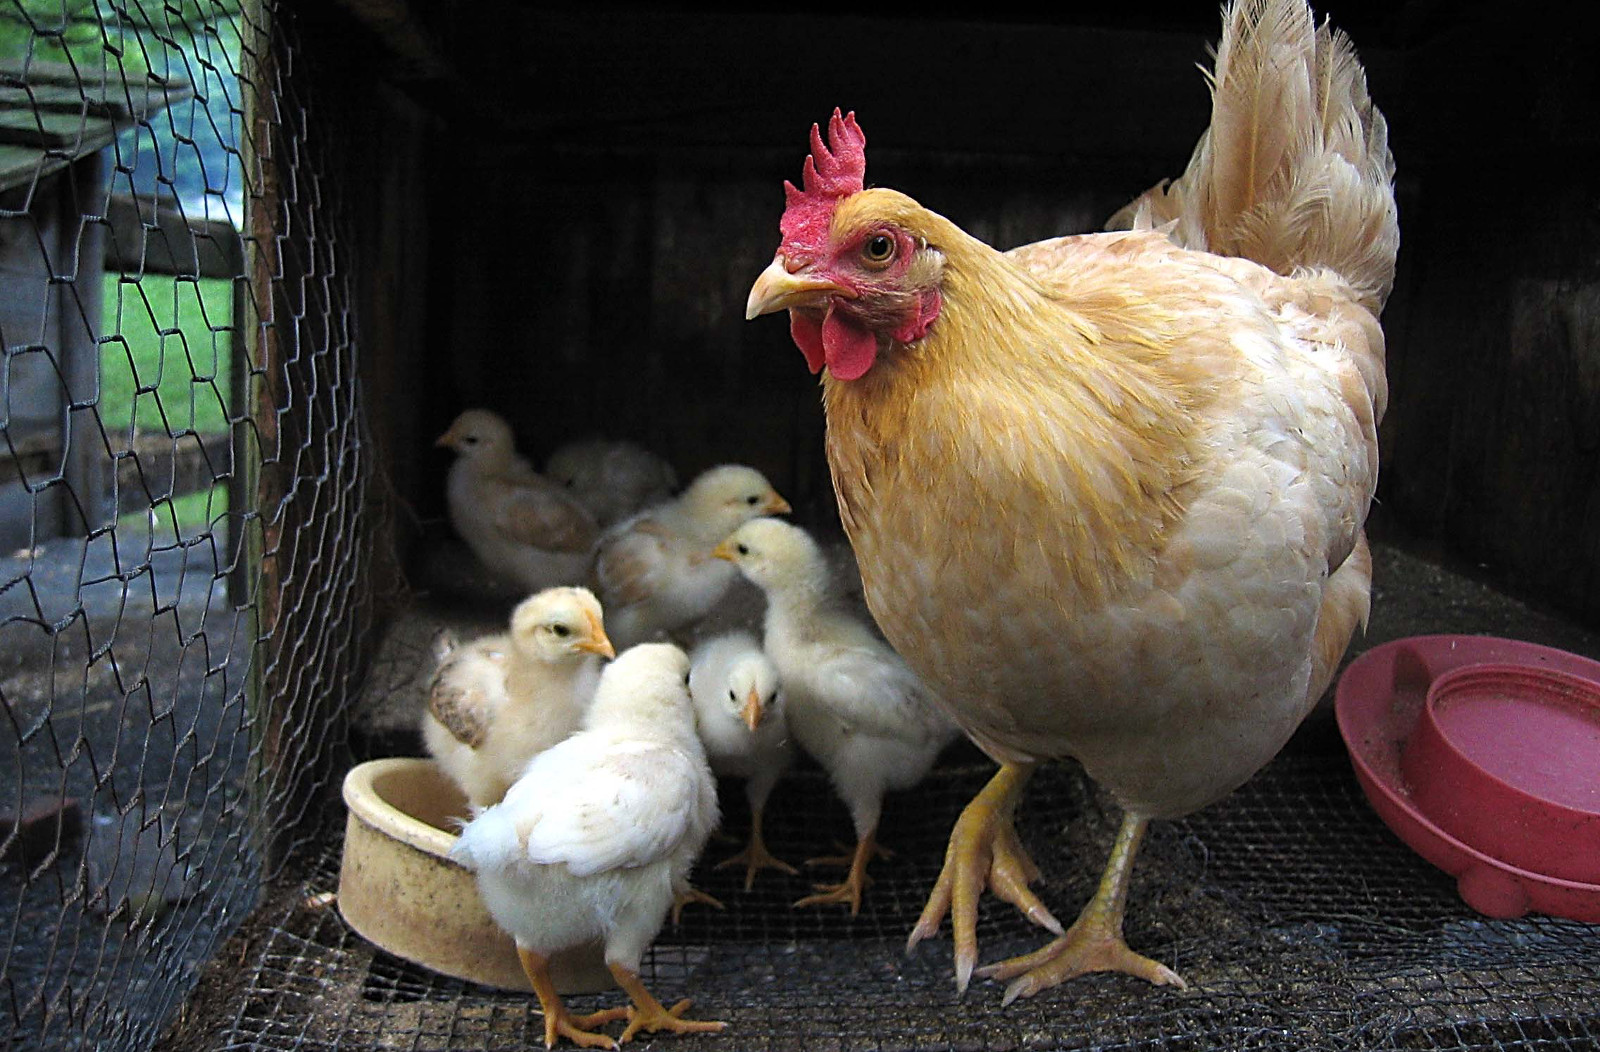 How the Egg Industry Has Altered the Lives of Hens